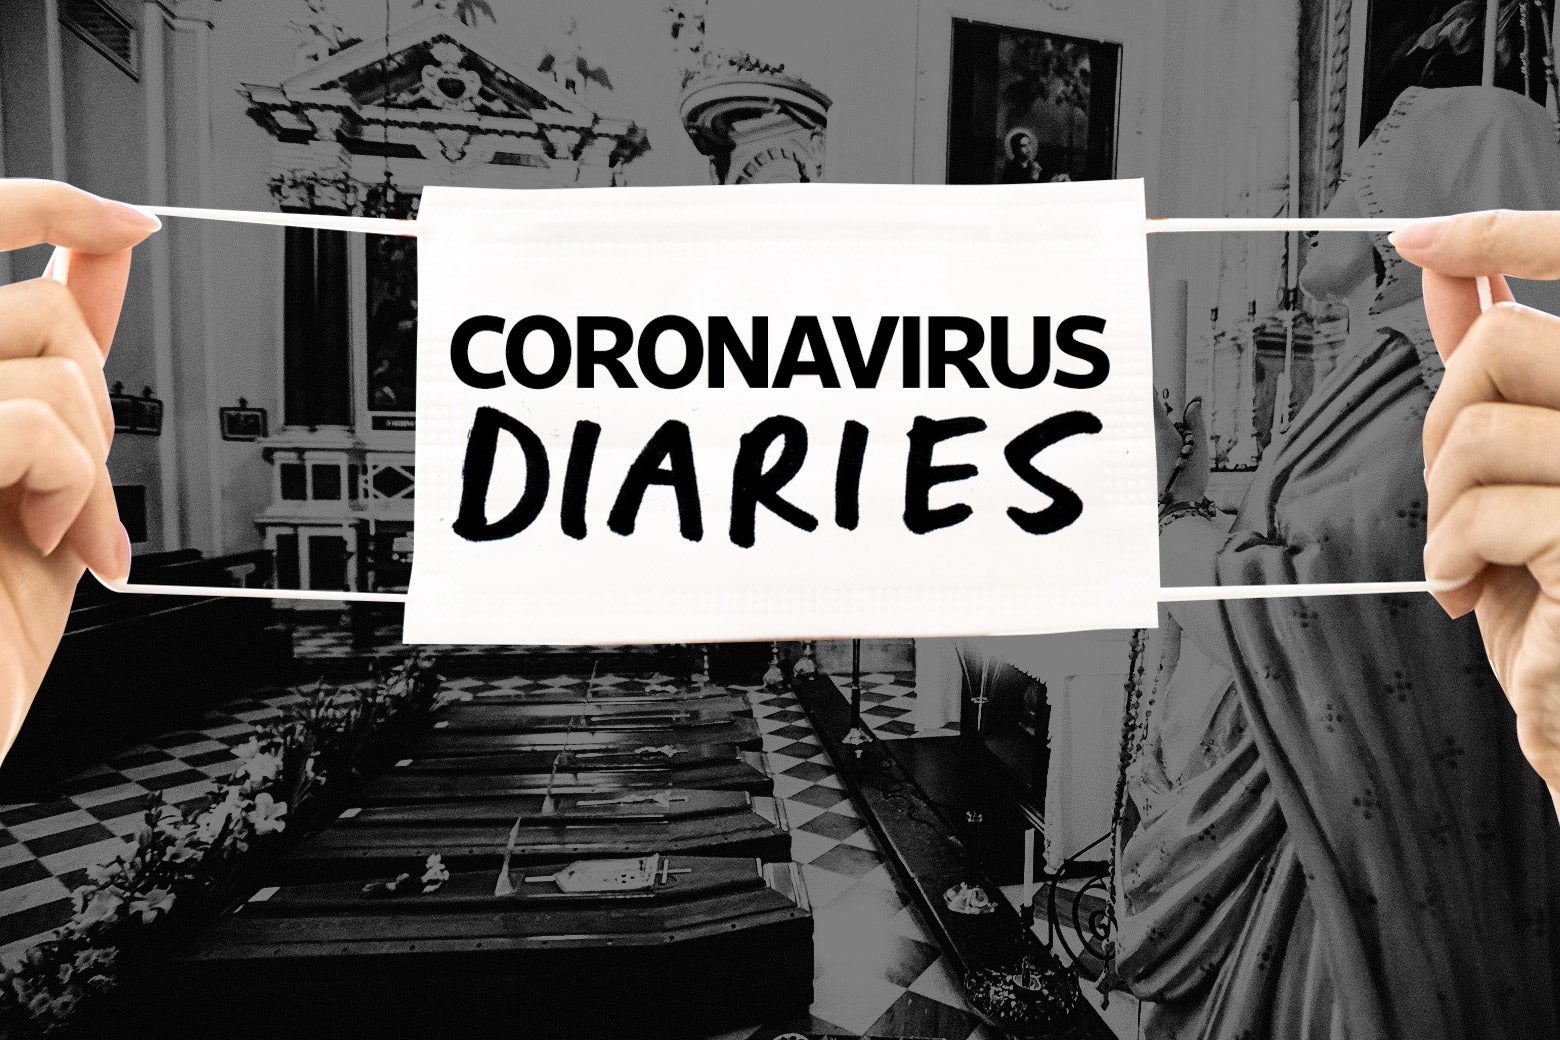 The Coronavirus Diaries tag across a background of a church in Italy that has five coffins in it.